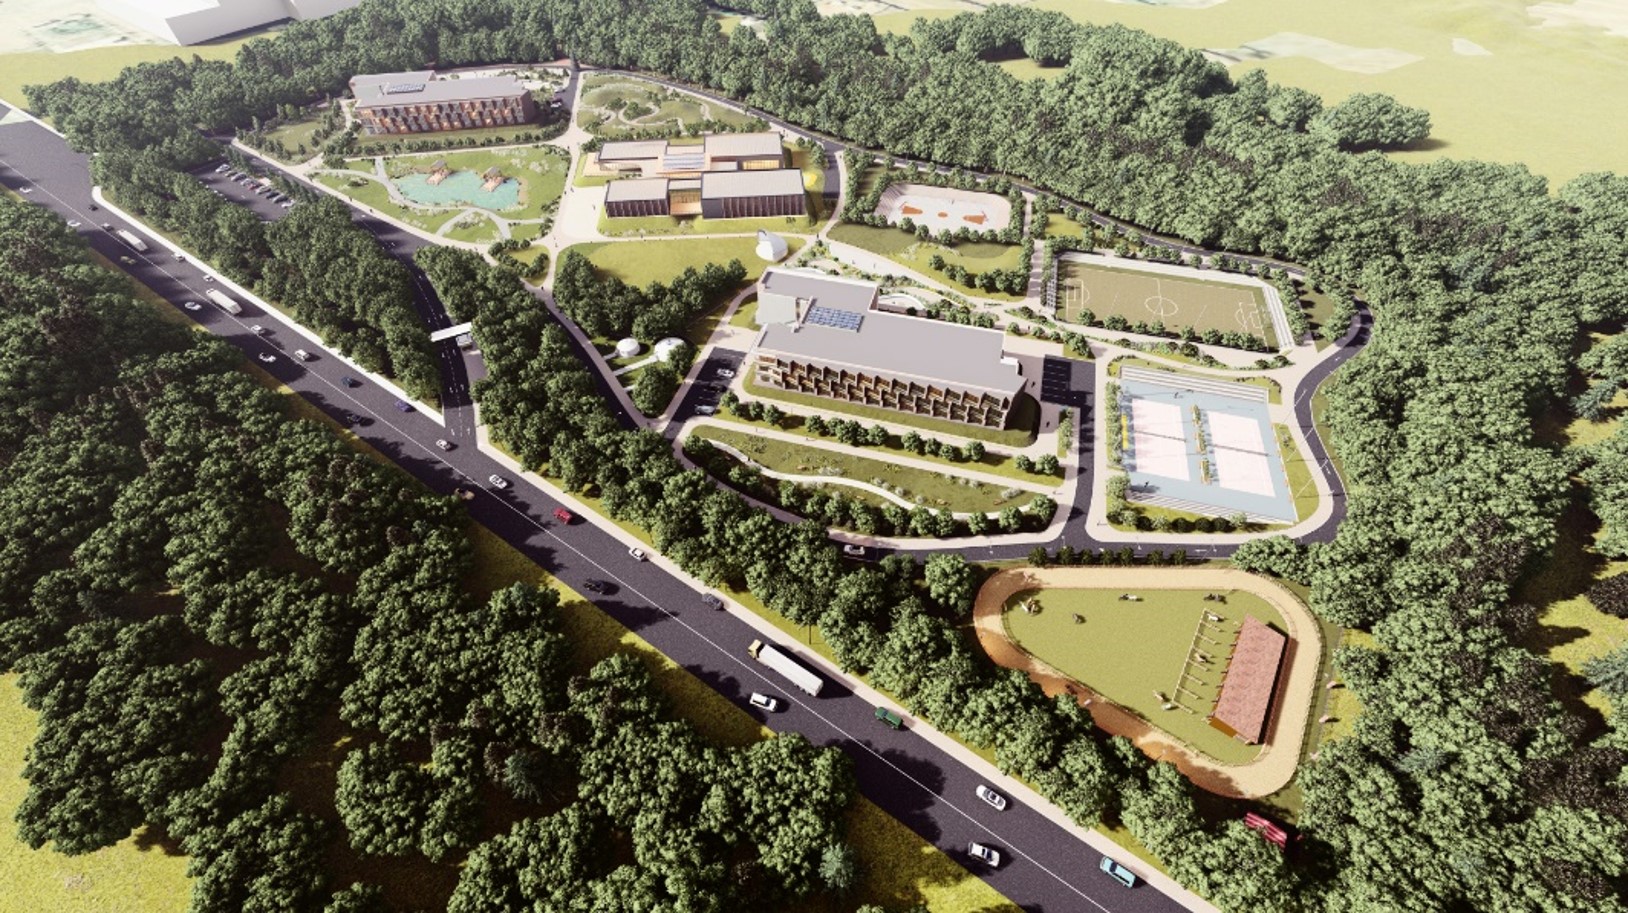 CAMPUS MASTER PLAN AND CONCEPT